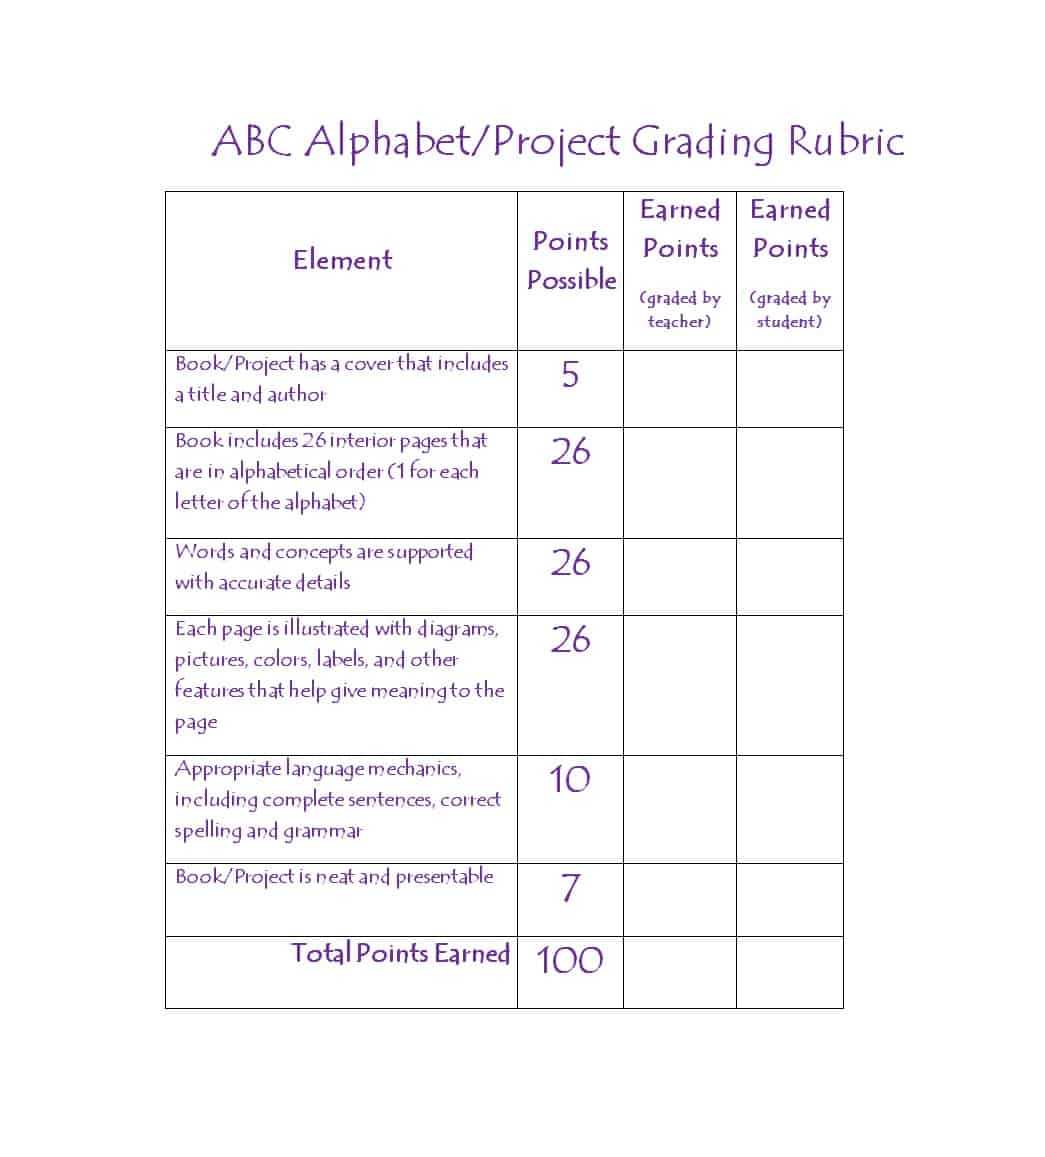 46 Editable Rubric Templates (Word Format) ᐅ Templatelab With Blank Rubric Template